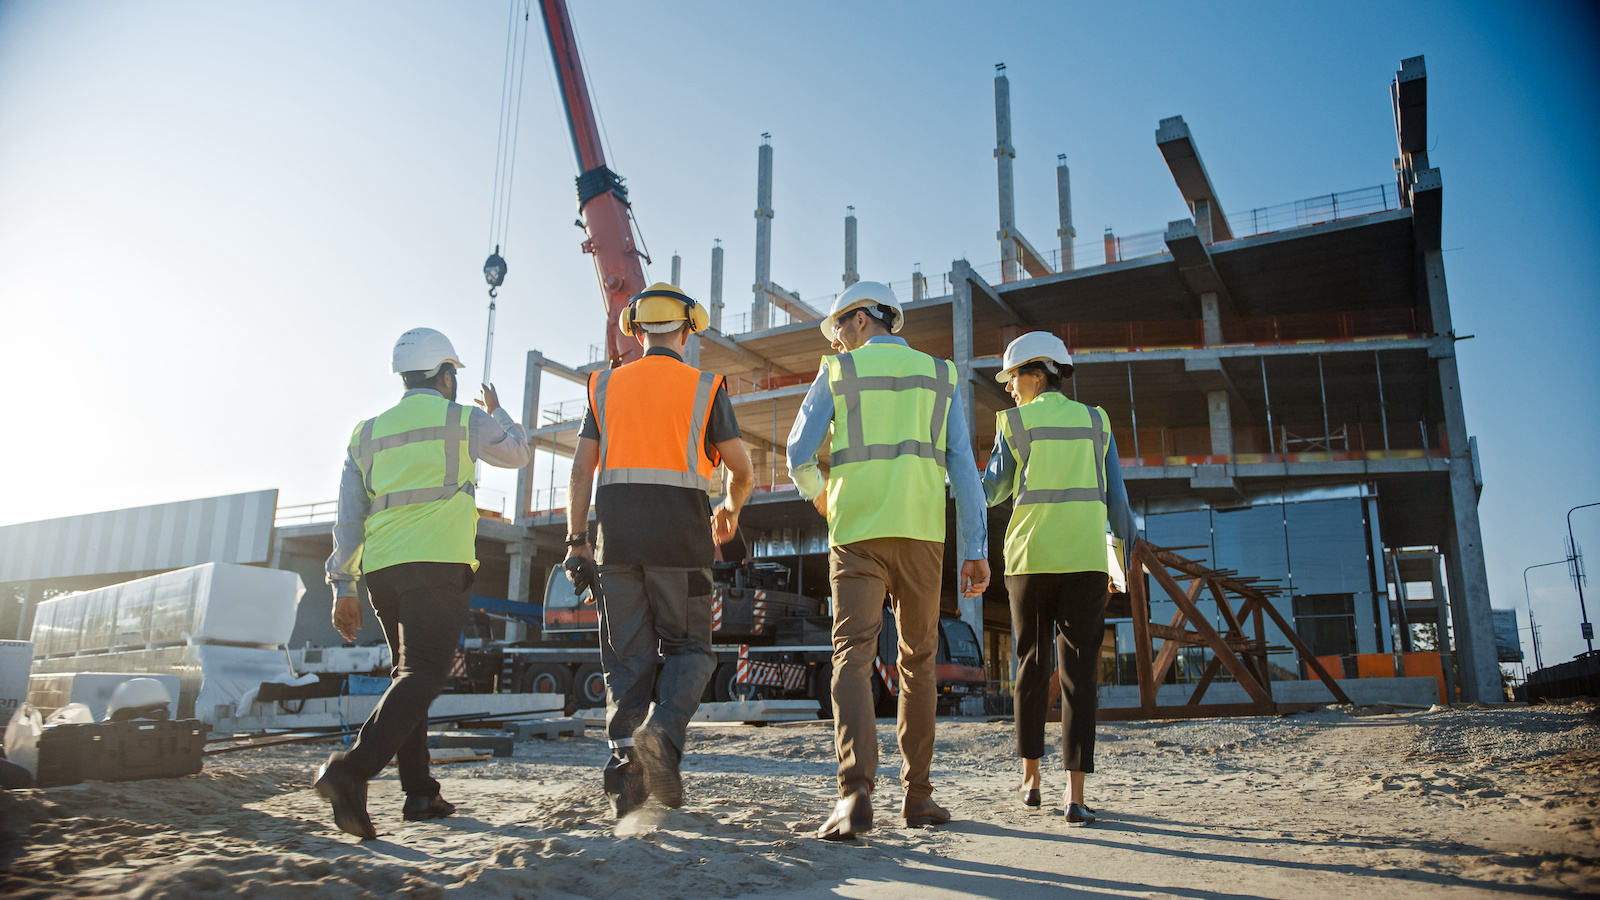 Diverse Team of Specialists Inspect Commercial, Industrial Building Construction Site. Real Estate Project with Civil Engineer, Investor and Worker. In the Background Crane, Skyscraper Formwork Frames. Image: Adobe Stock